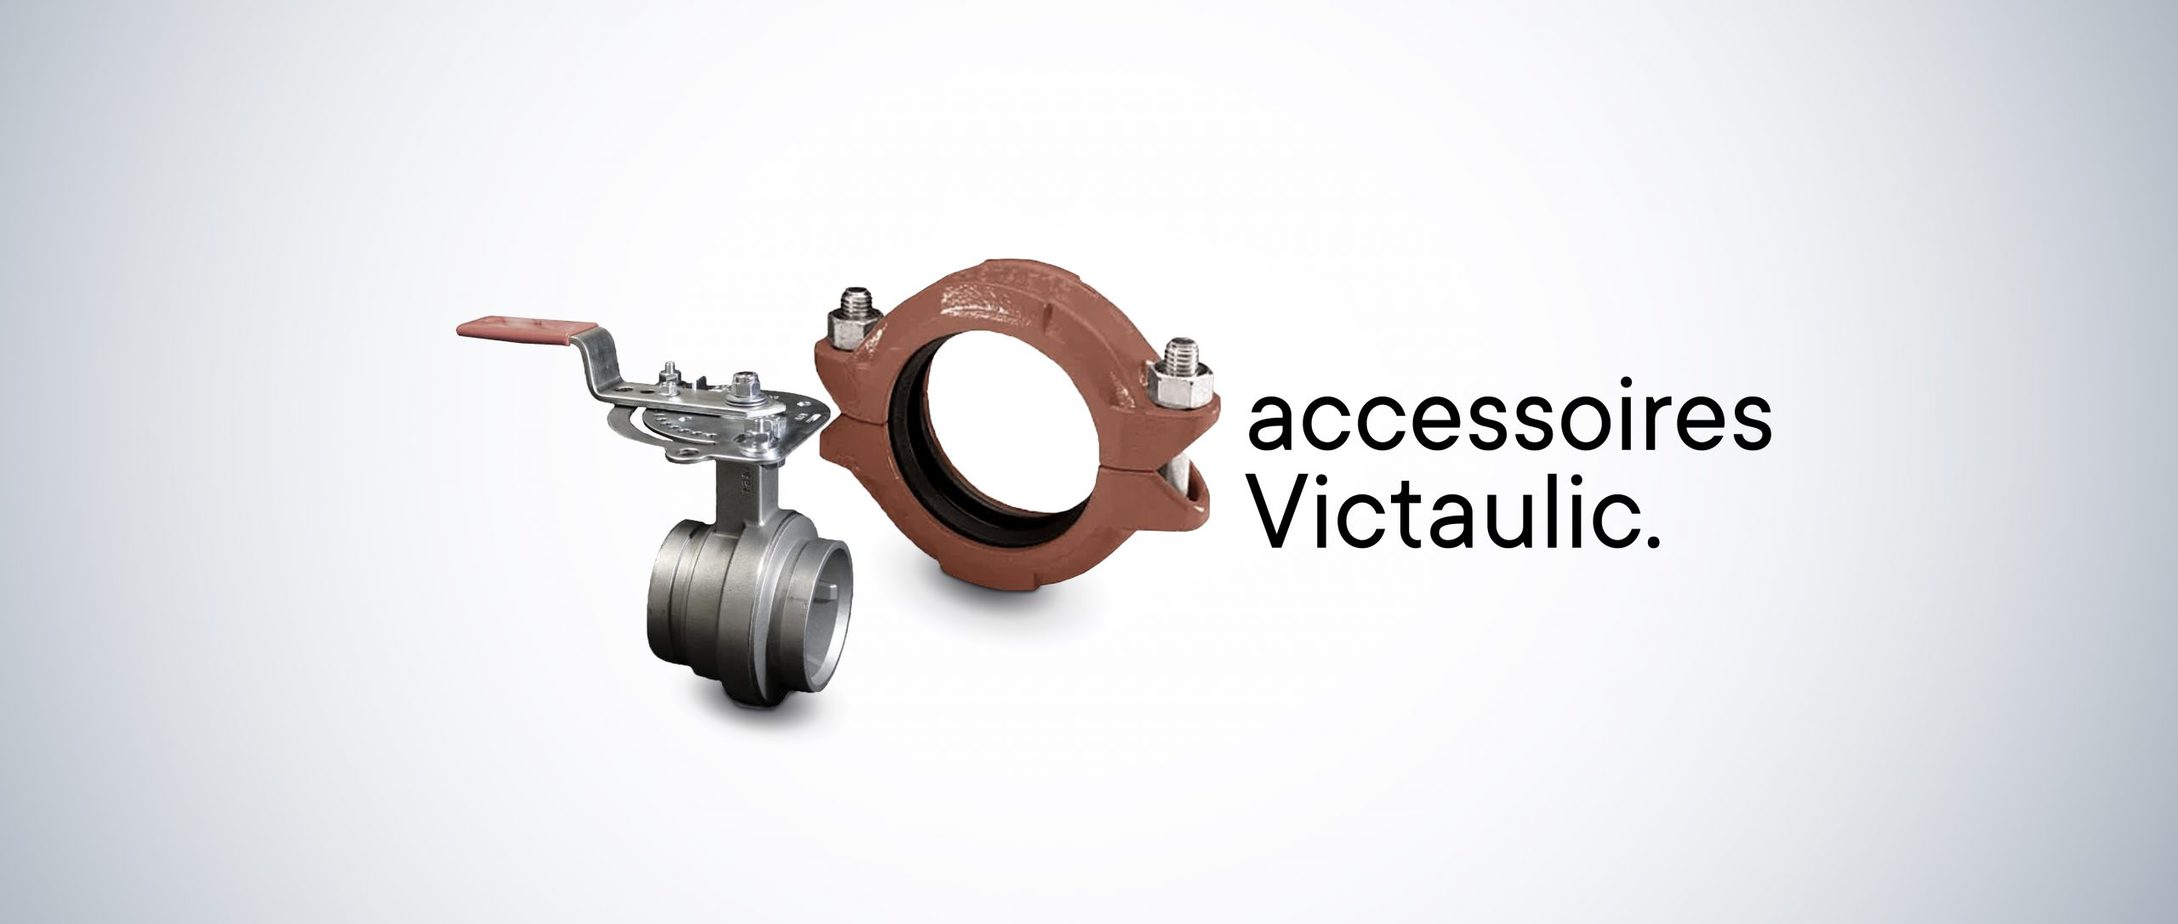 accessoires-victaulic-scaled